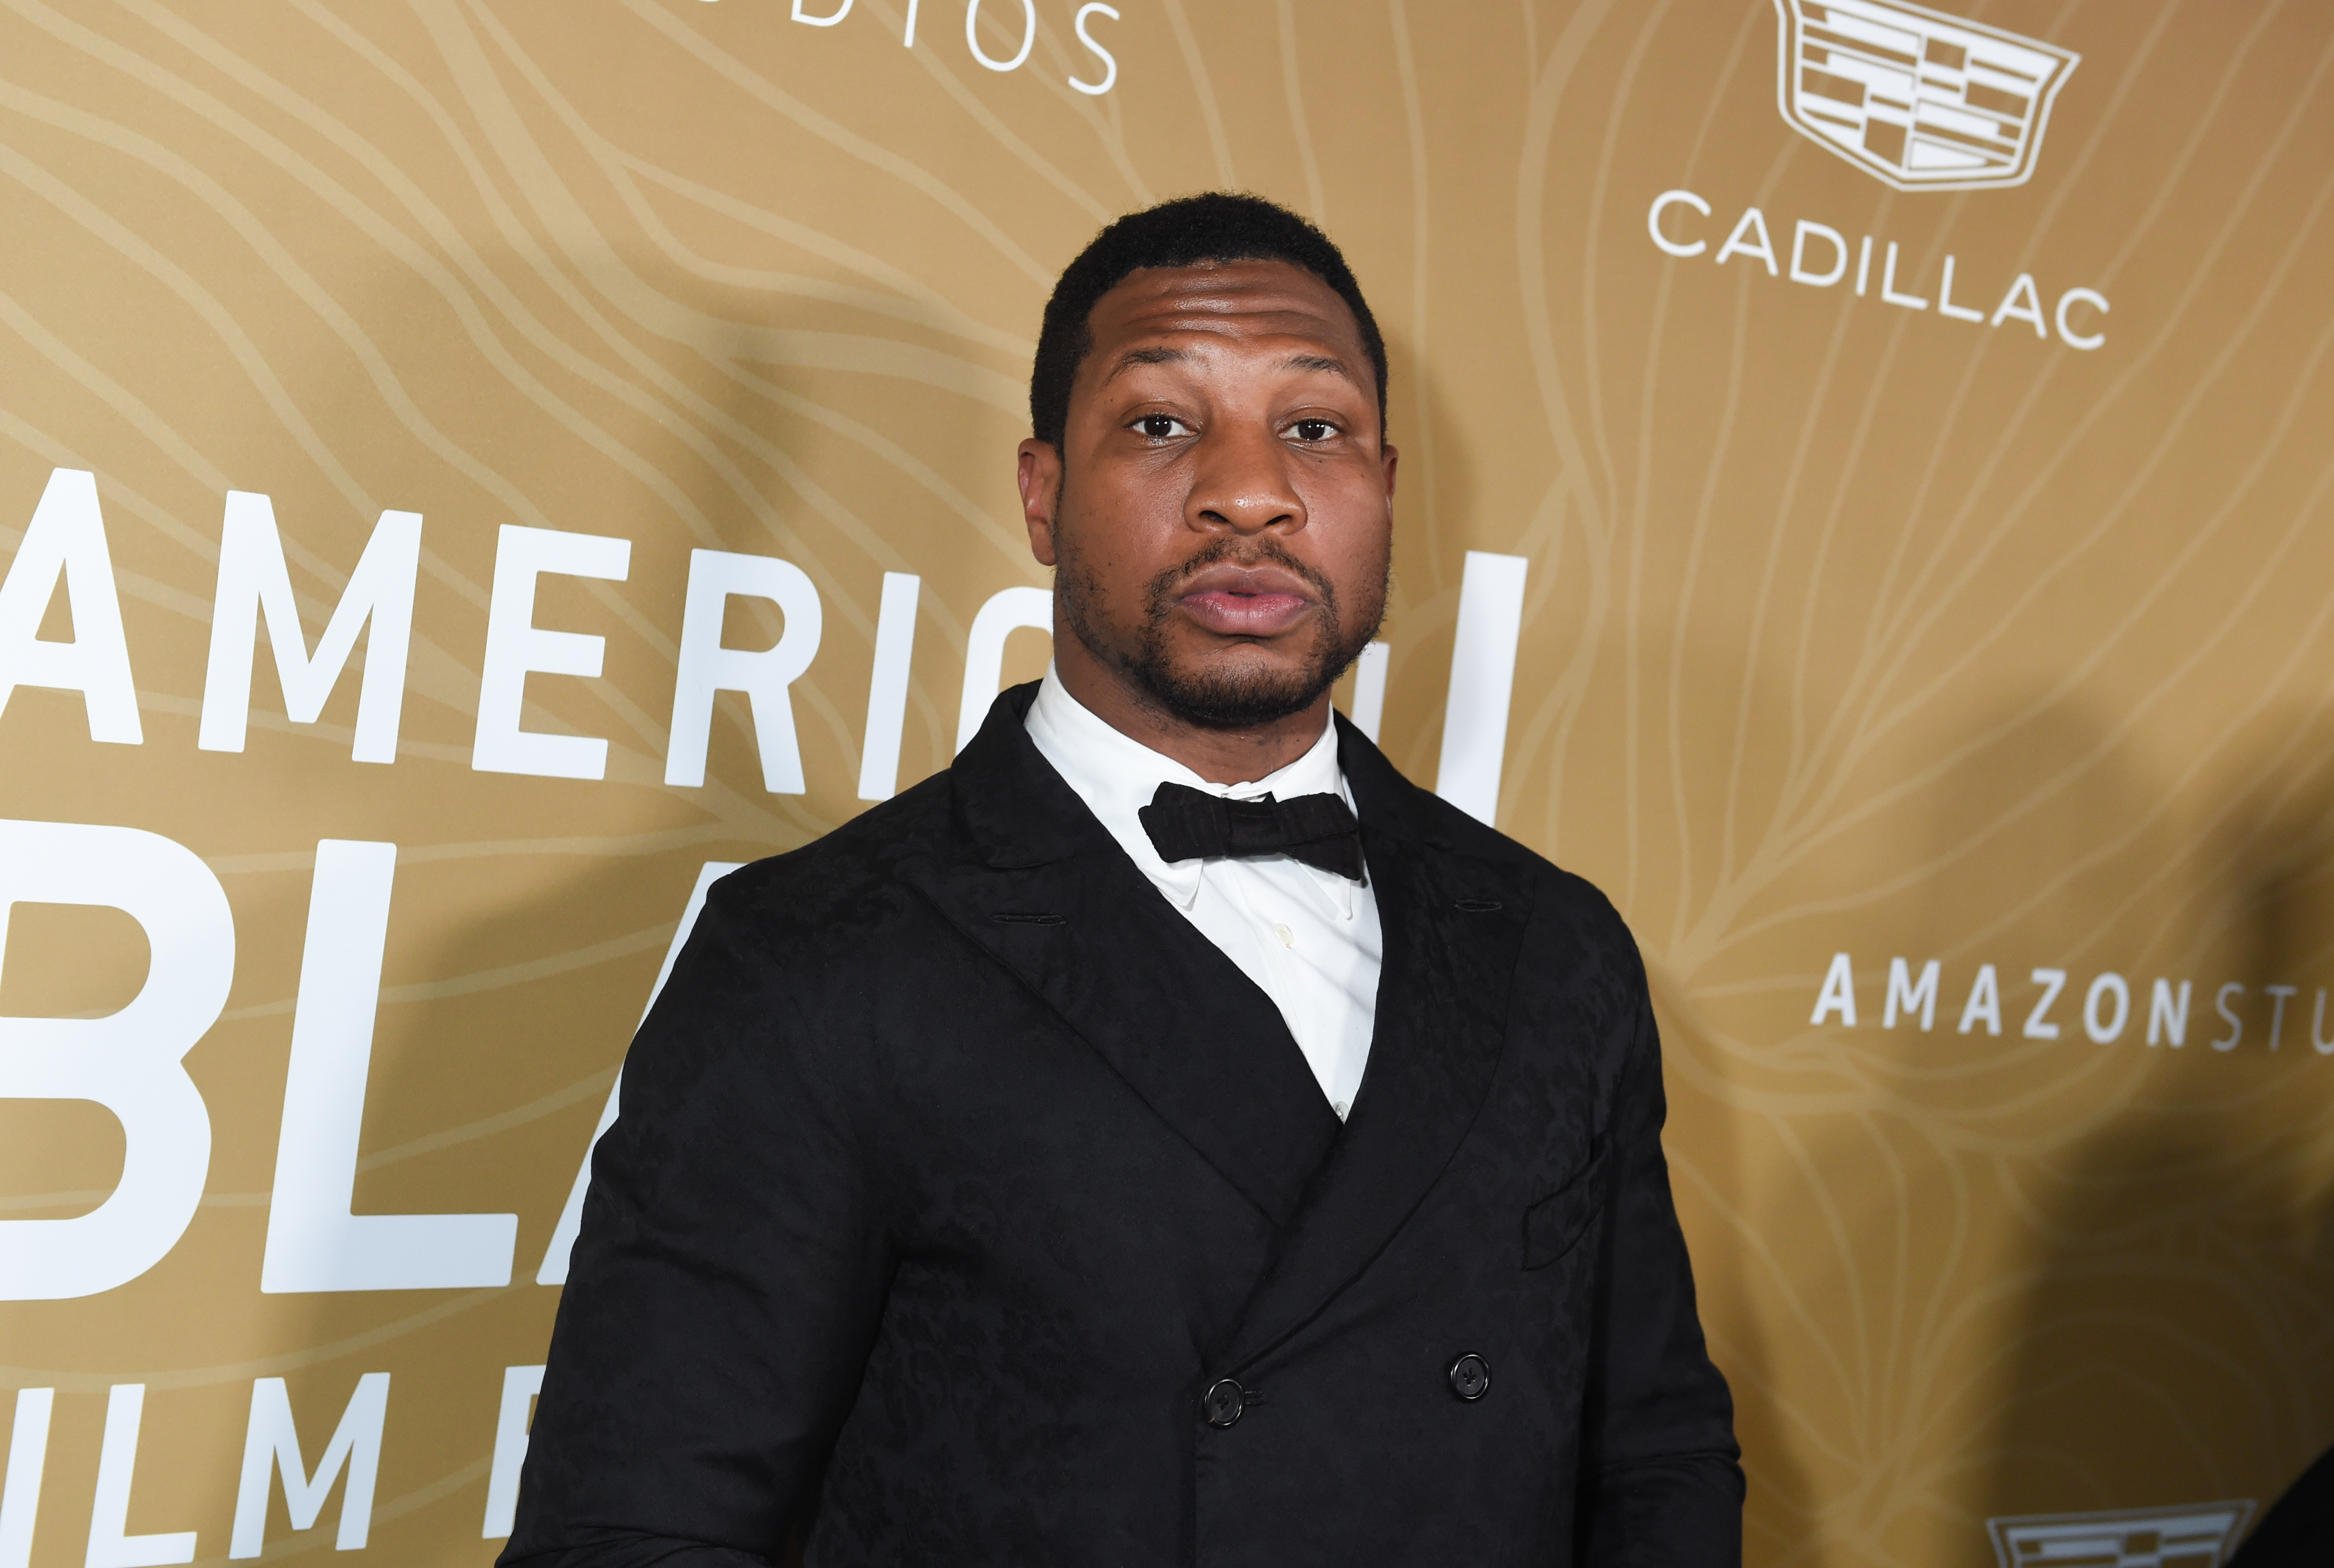 Jonathan Majors Seen Leaving NYC Courthouse In “FREEDOM” Cap After Facing Assault Allegations